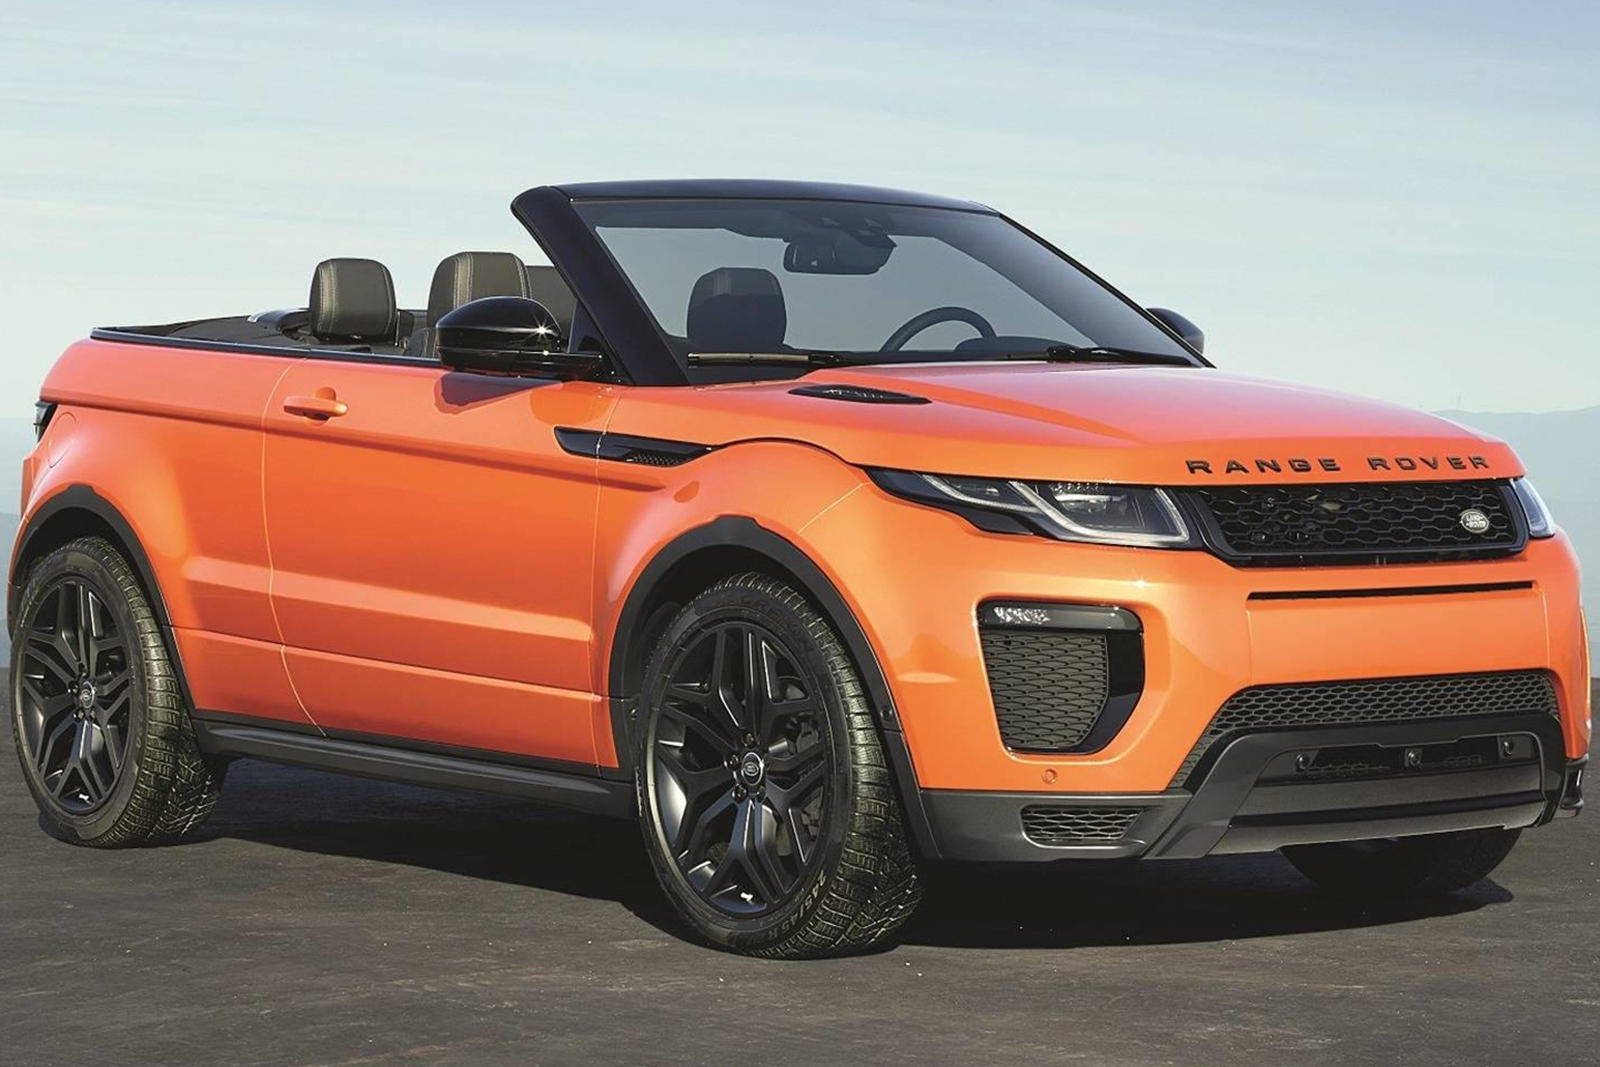 2019 Land Rover Range Rover Evoque Convertible: Review, Trims, Specs,  Price, New Interior Features, Exterior Design, and Specifications